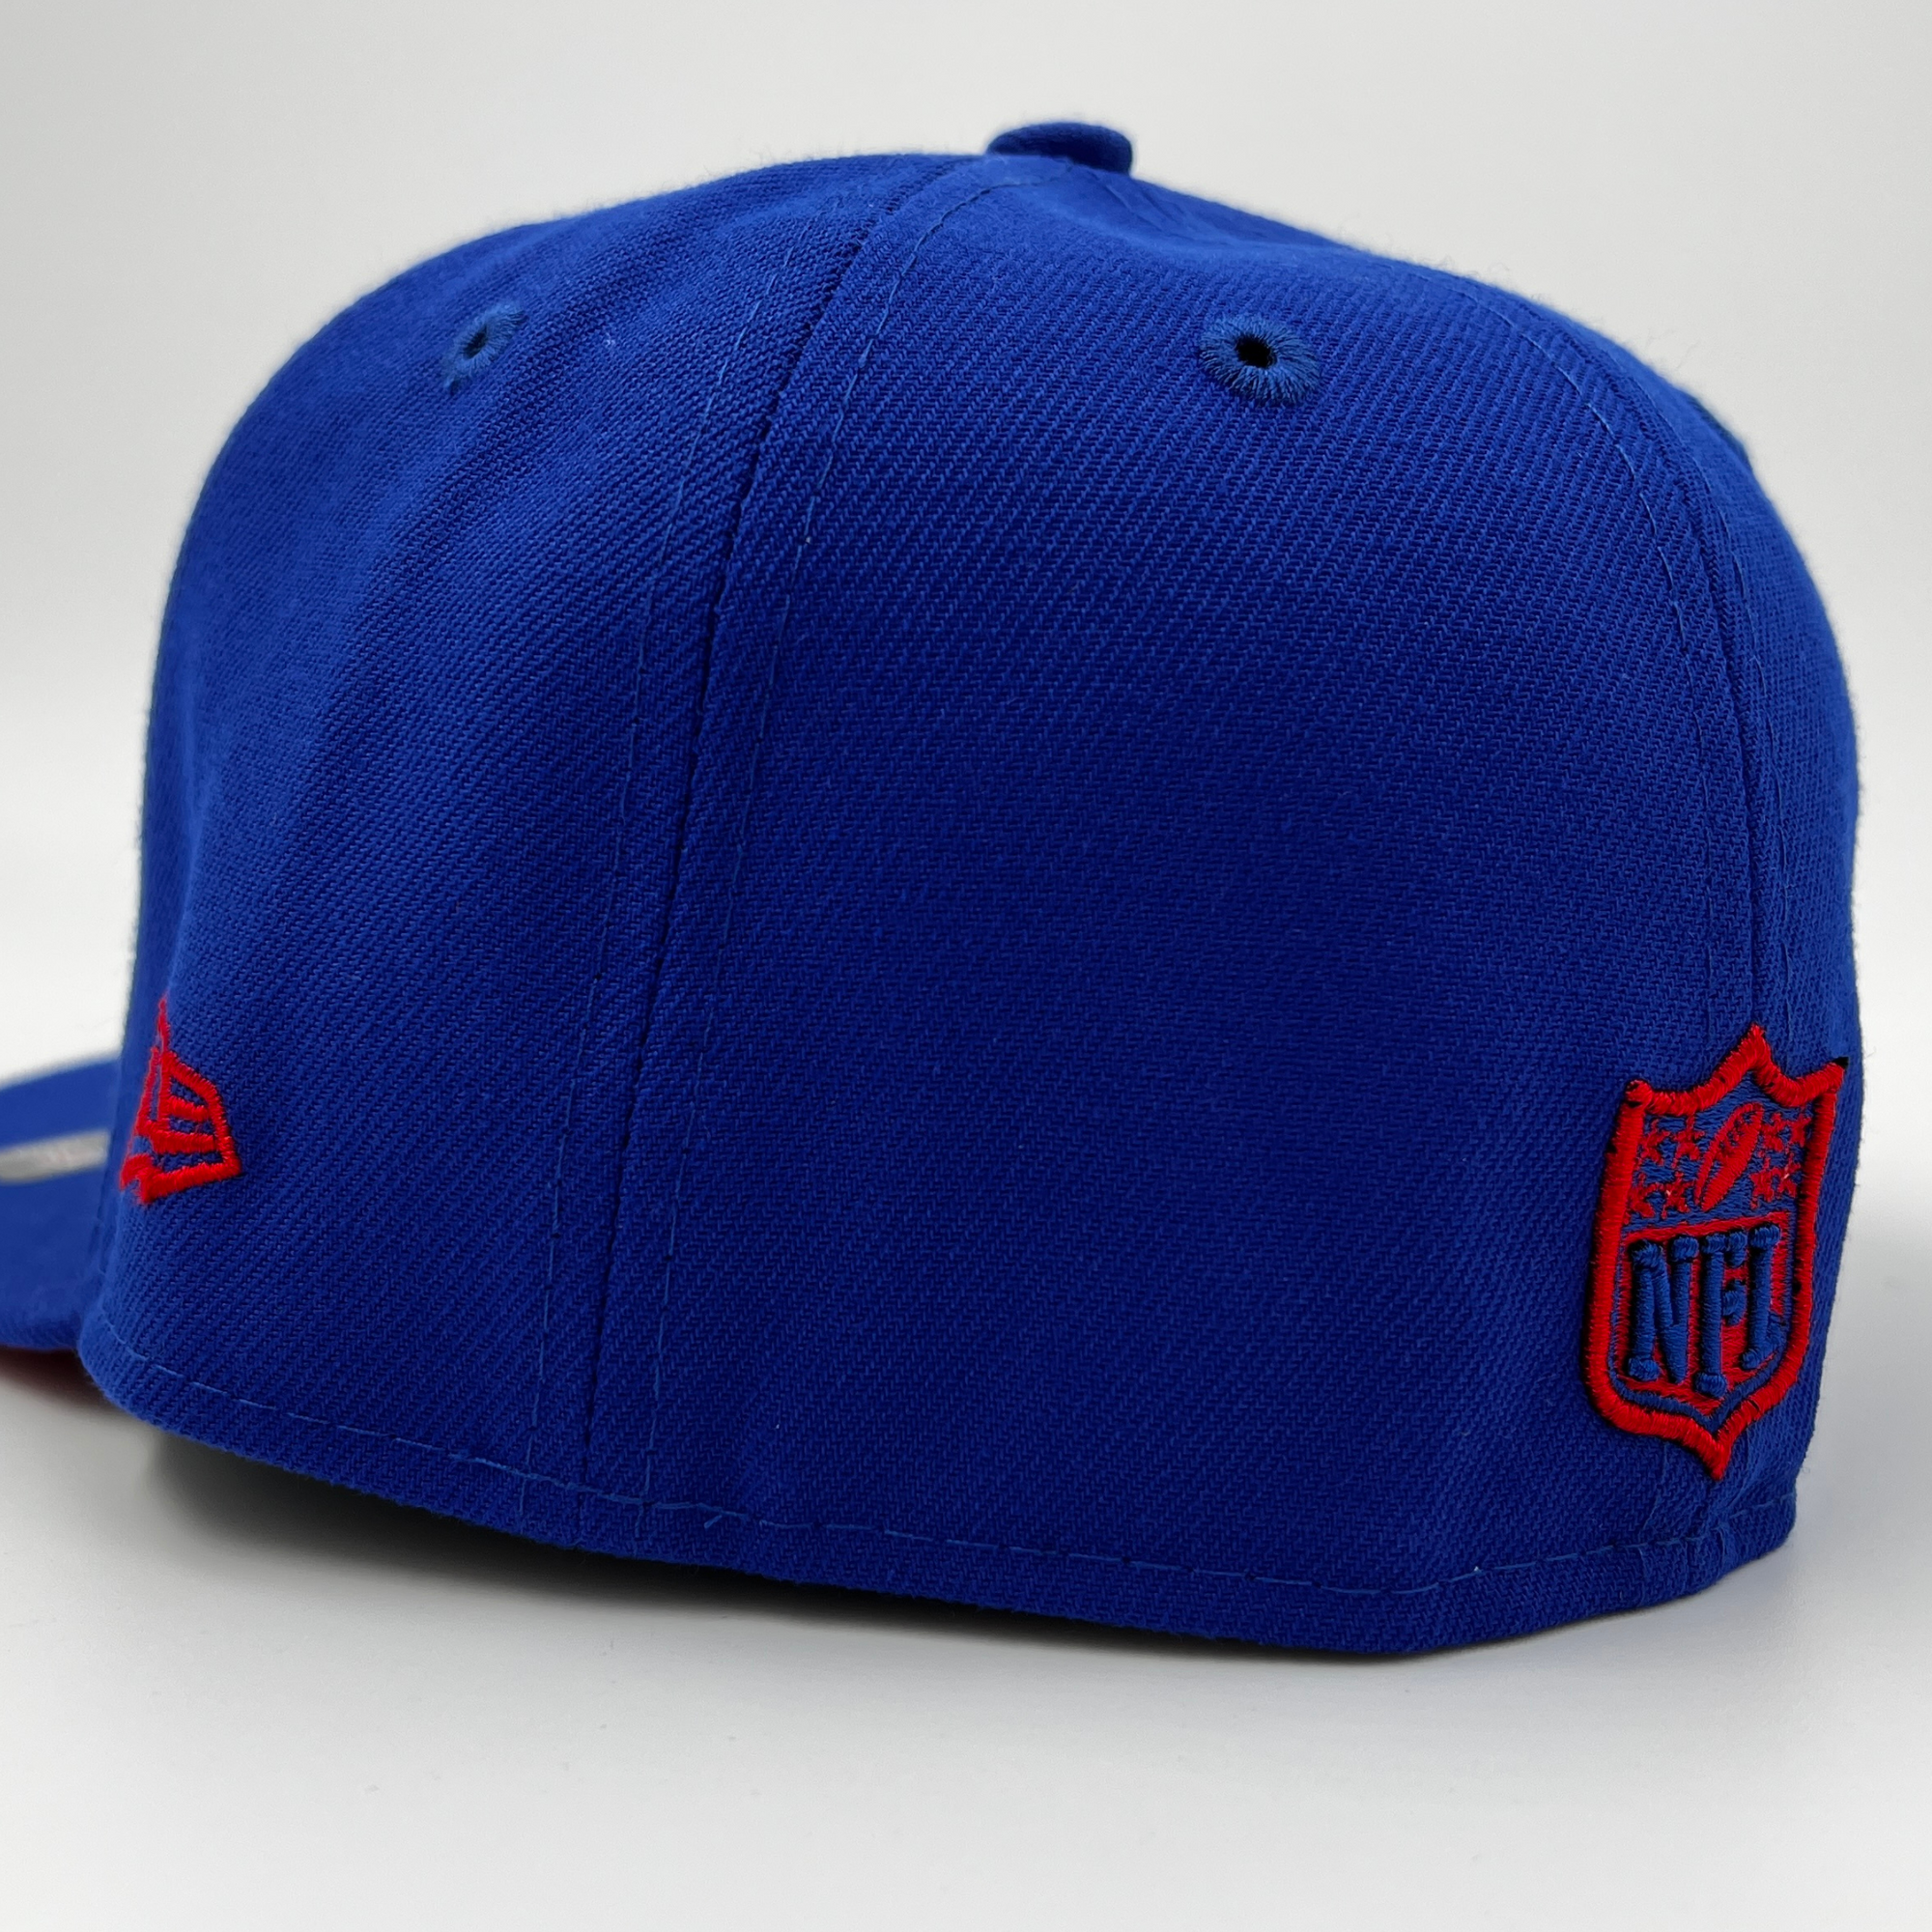 New Era Buffalo Bills Patches Royal Blue Fitted Hat